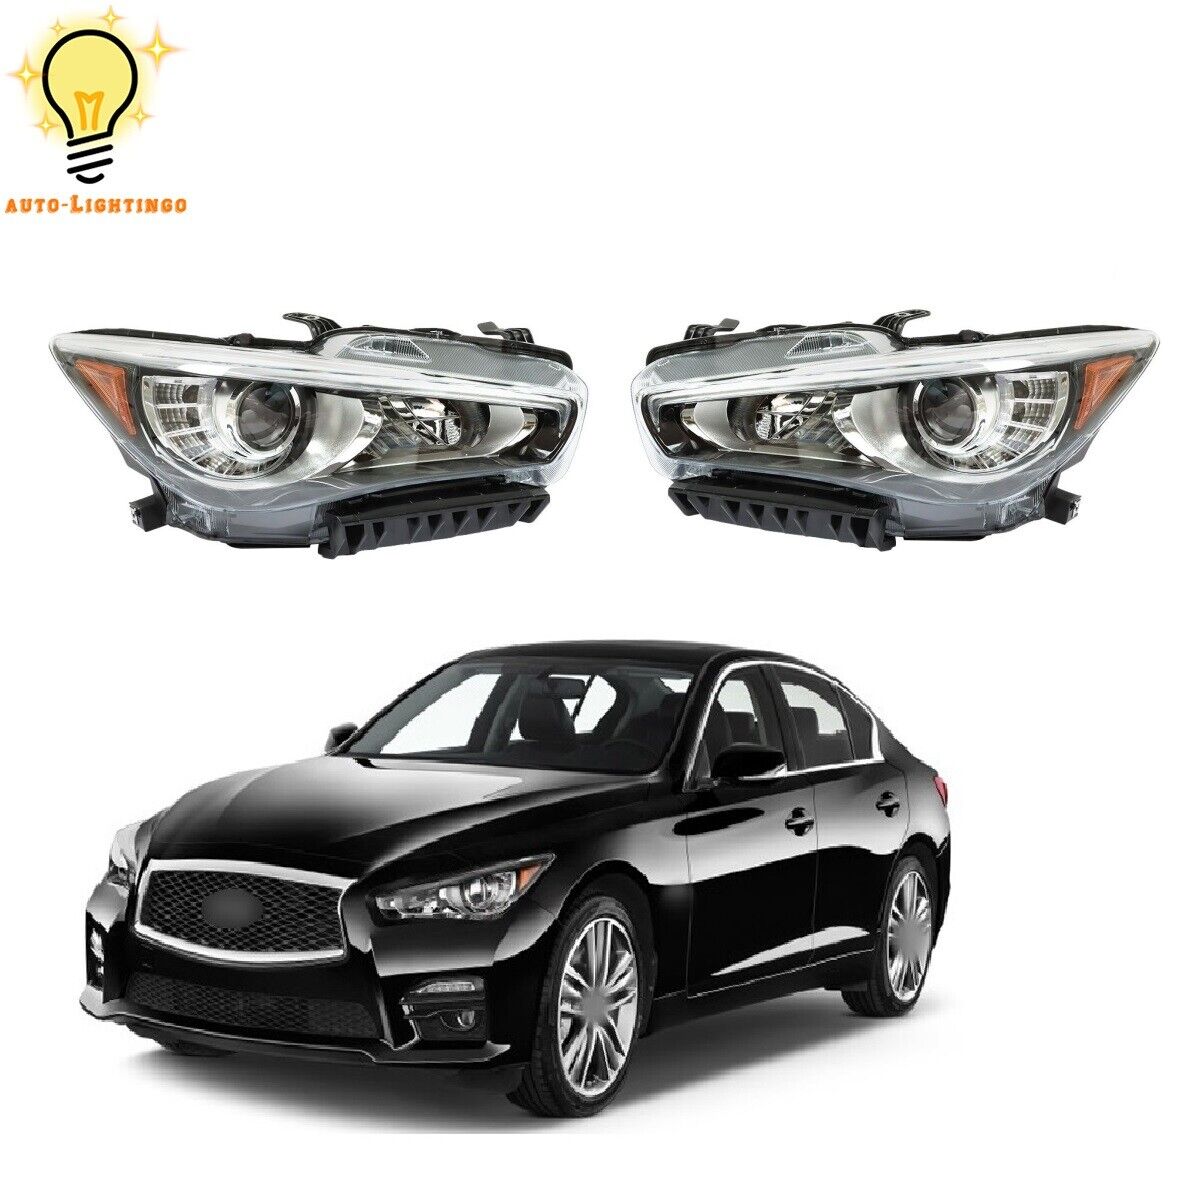 Headlights Headlamps Assy Left Side&Right Side For 2014-2016 2017 Infiniti Q50